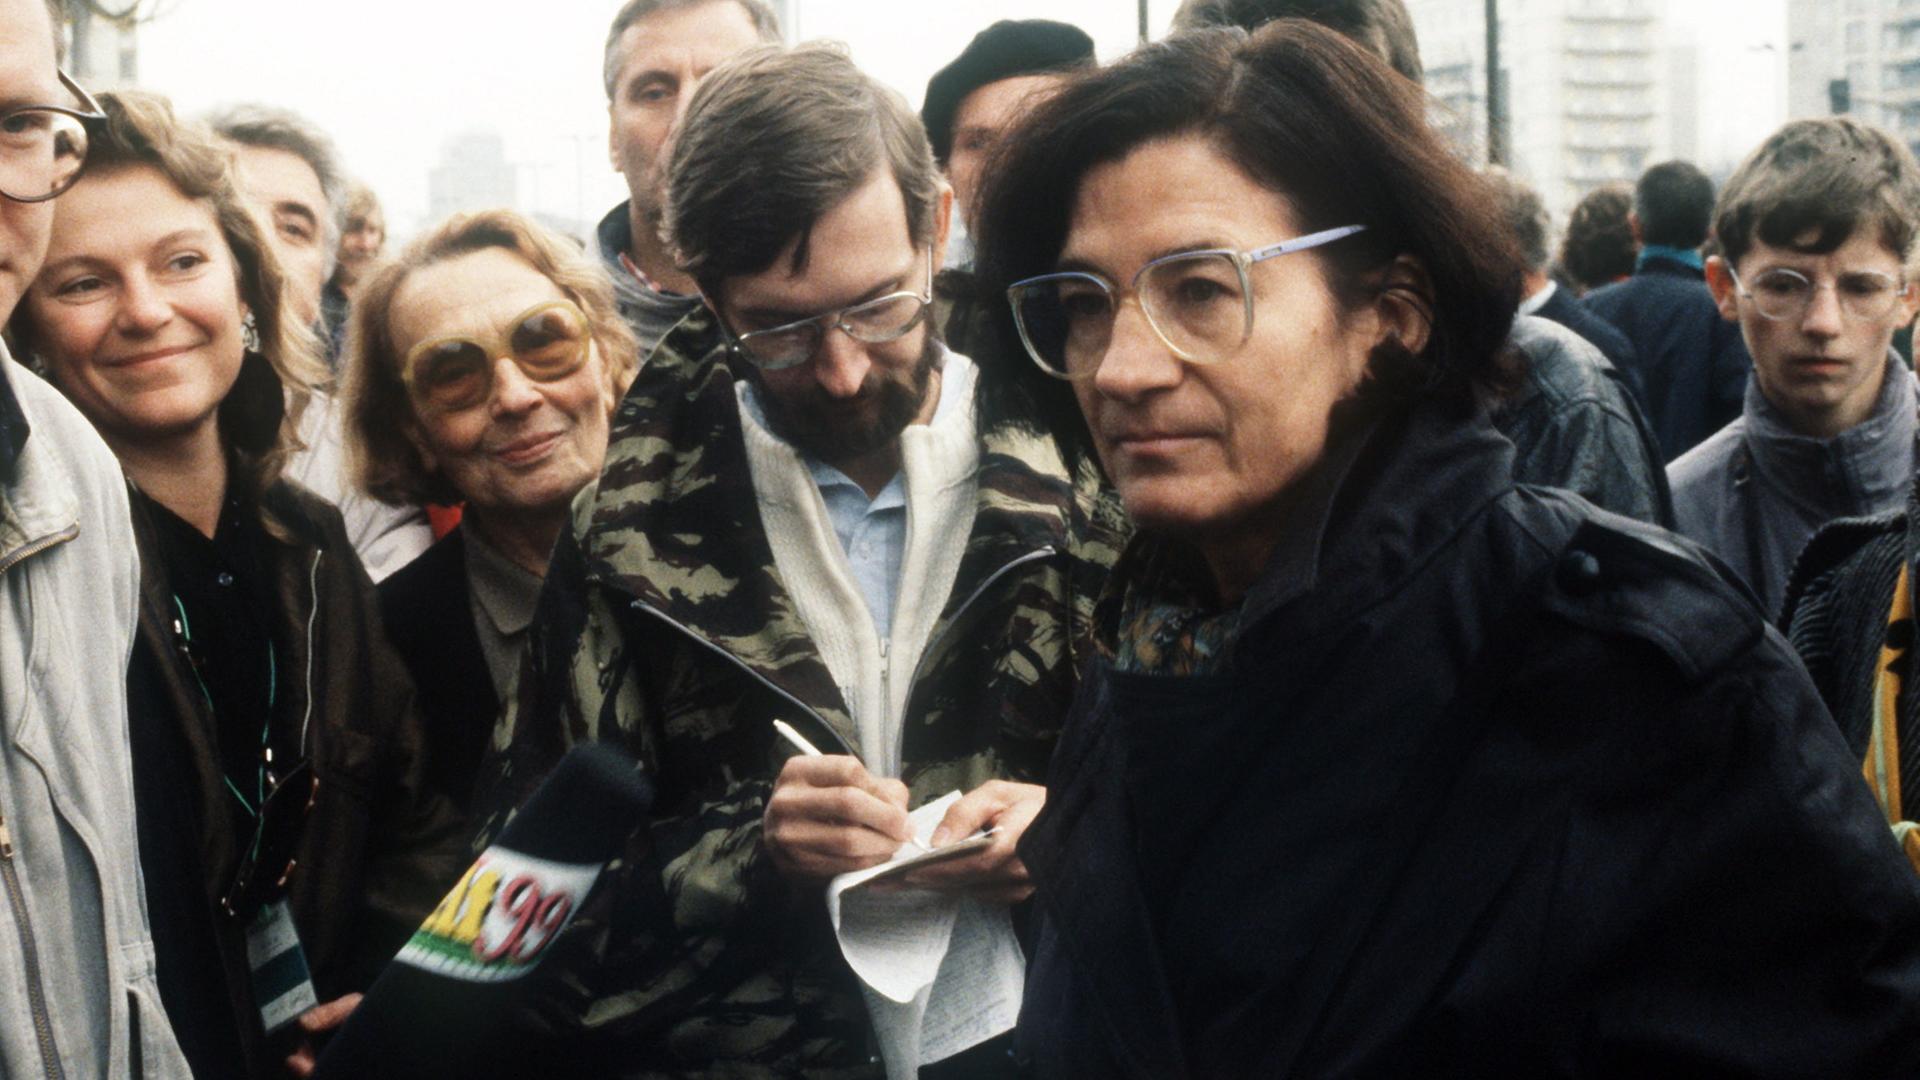 epa03020794 (FILE) A file picture dated 04 November 1989 shows German writer Christa Wolf (R) during a demonstration in Berlin, East Germany. Christa Wolf died on 01 December 2011 at the age of 82, publisher Suhrkamp reported. EPA/GUENTER GUEFFROY